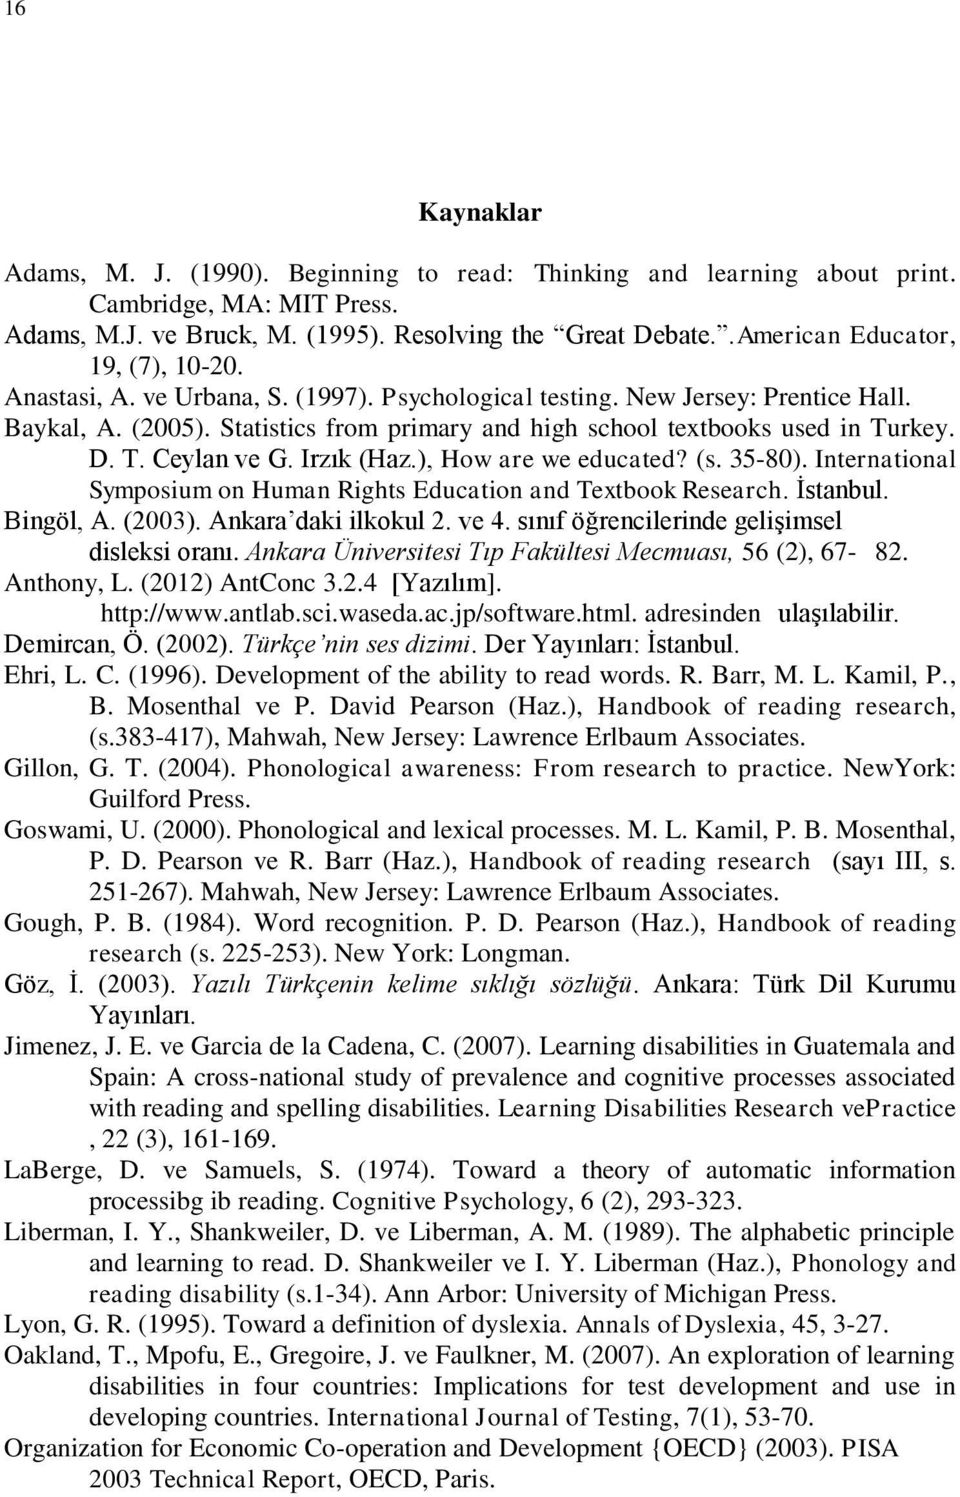 Statistics from primary and high school textbooks used in Turkey. D. T. Ceylan ve G. Irzık (Haz.), How are we educated? (s. 35-80).